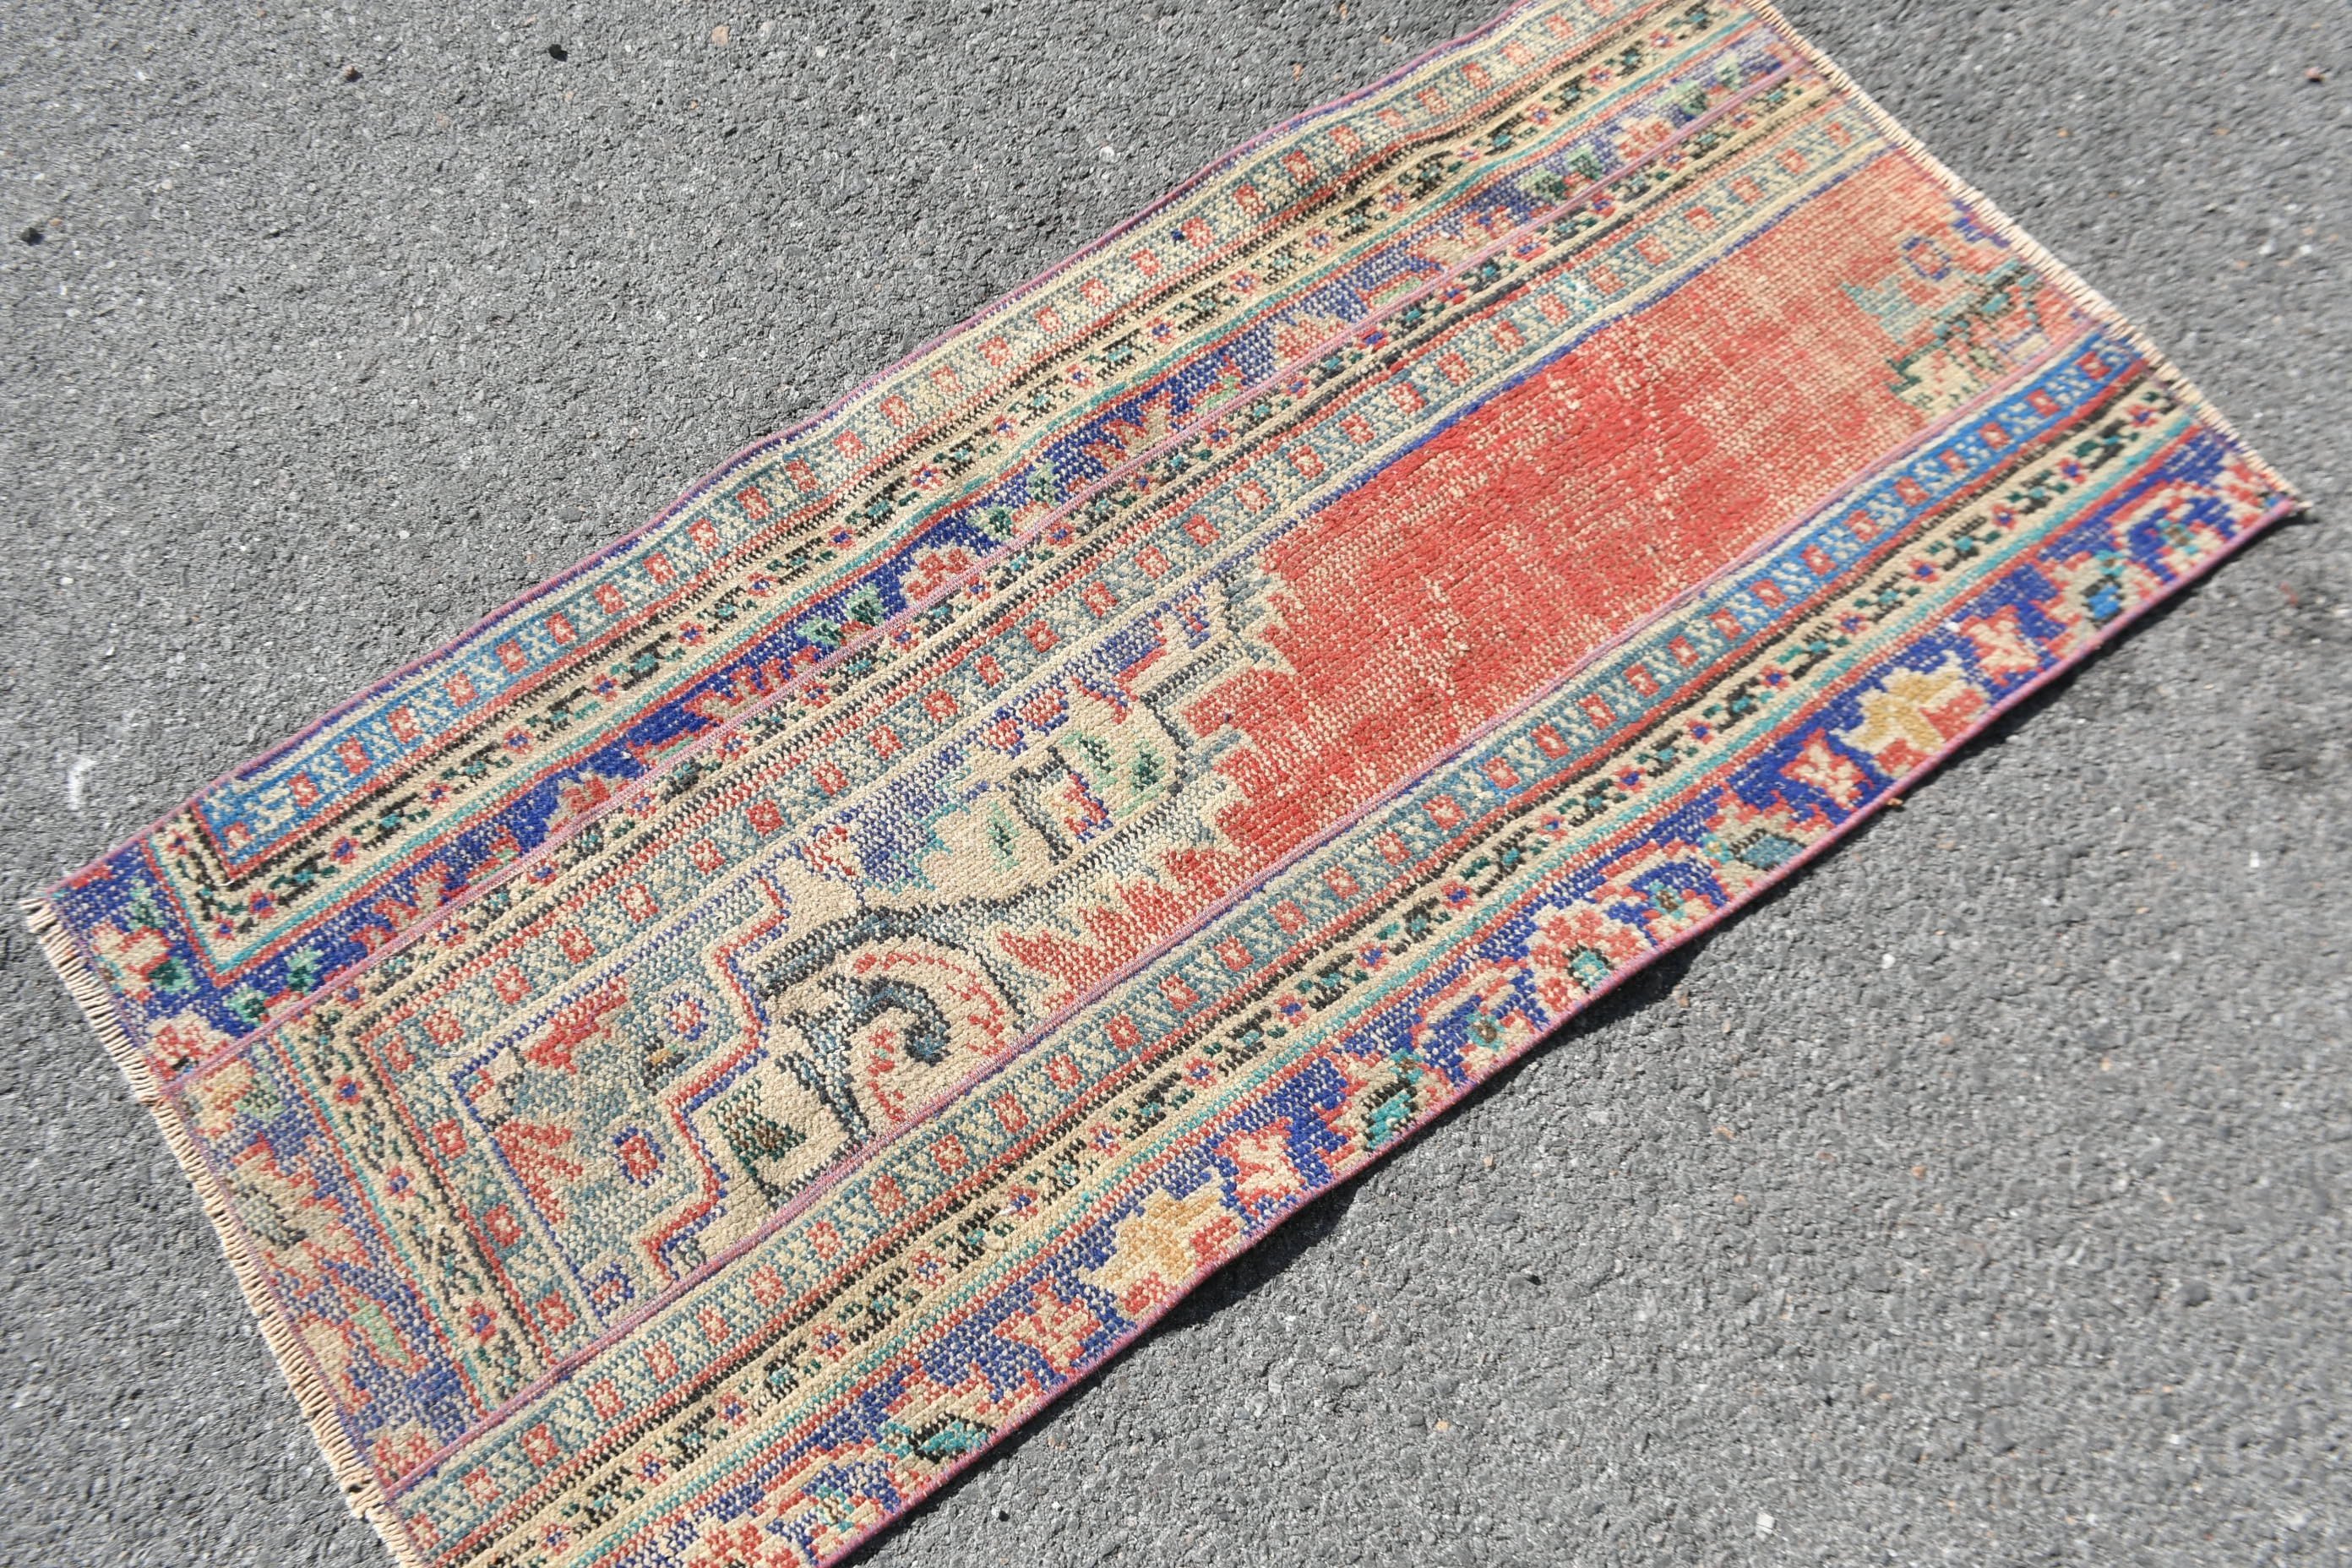 Turkish Rug, Bedroom Rugs, Kitchen Rug, Rugs for Car Mat, Anatolian Rug, Vintage Rugs, Ethnic Rug, 2.1x4.2 ft Small Rug, Blue Oriental Rugs